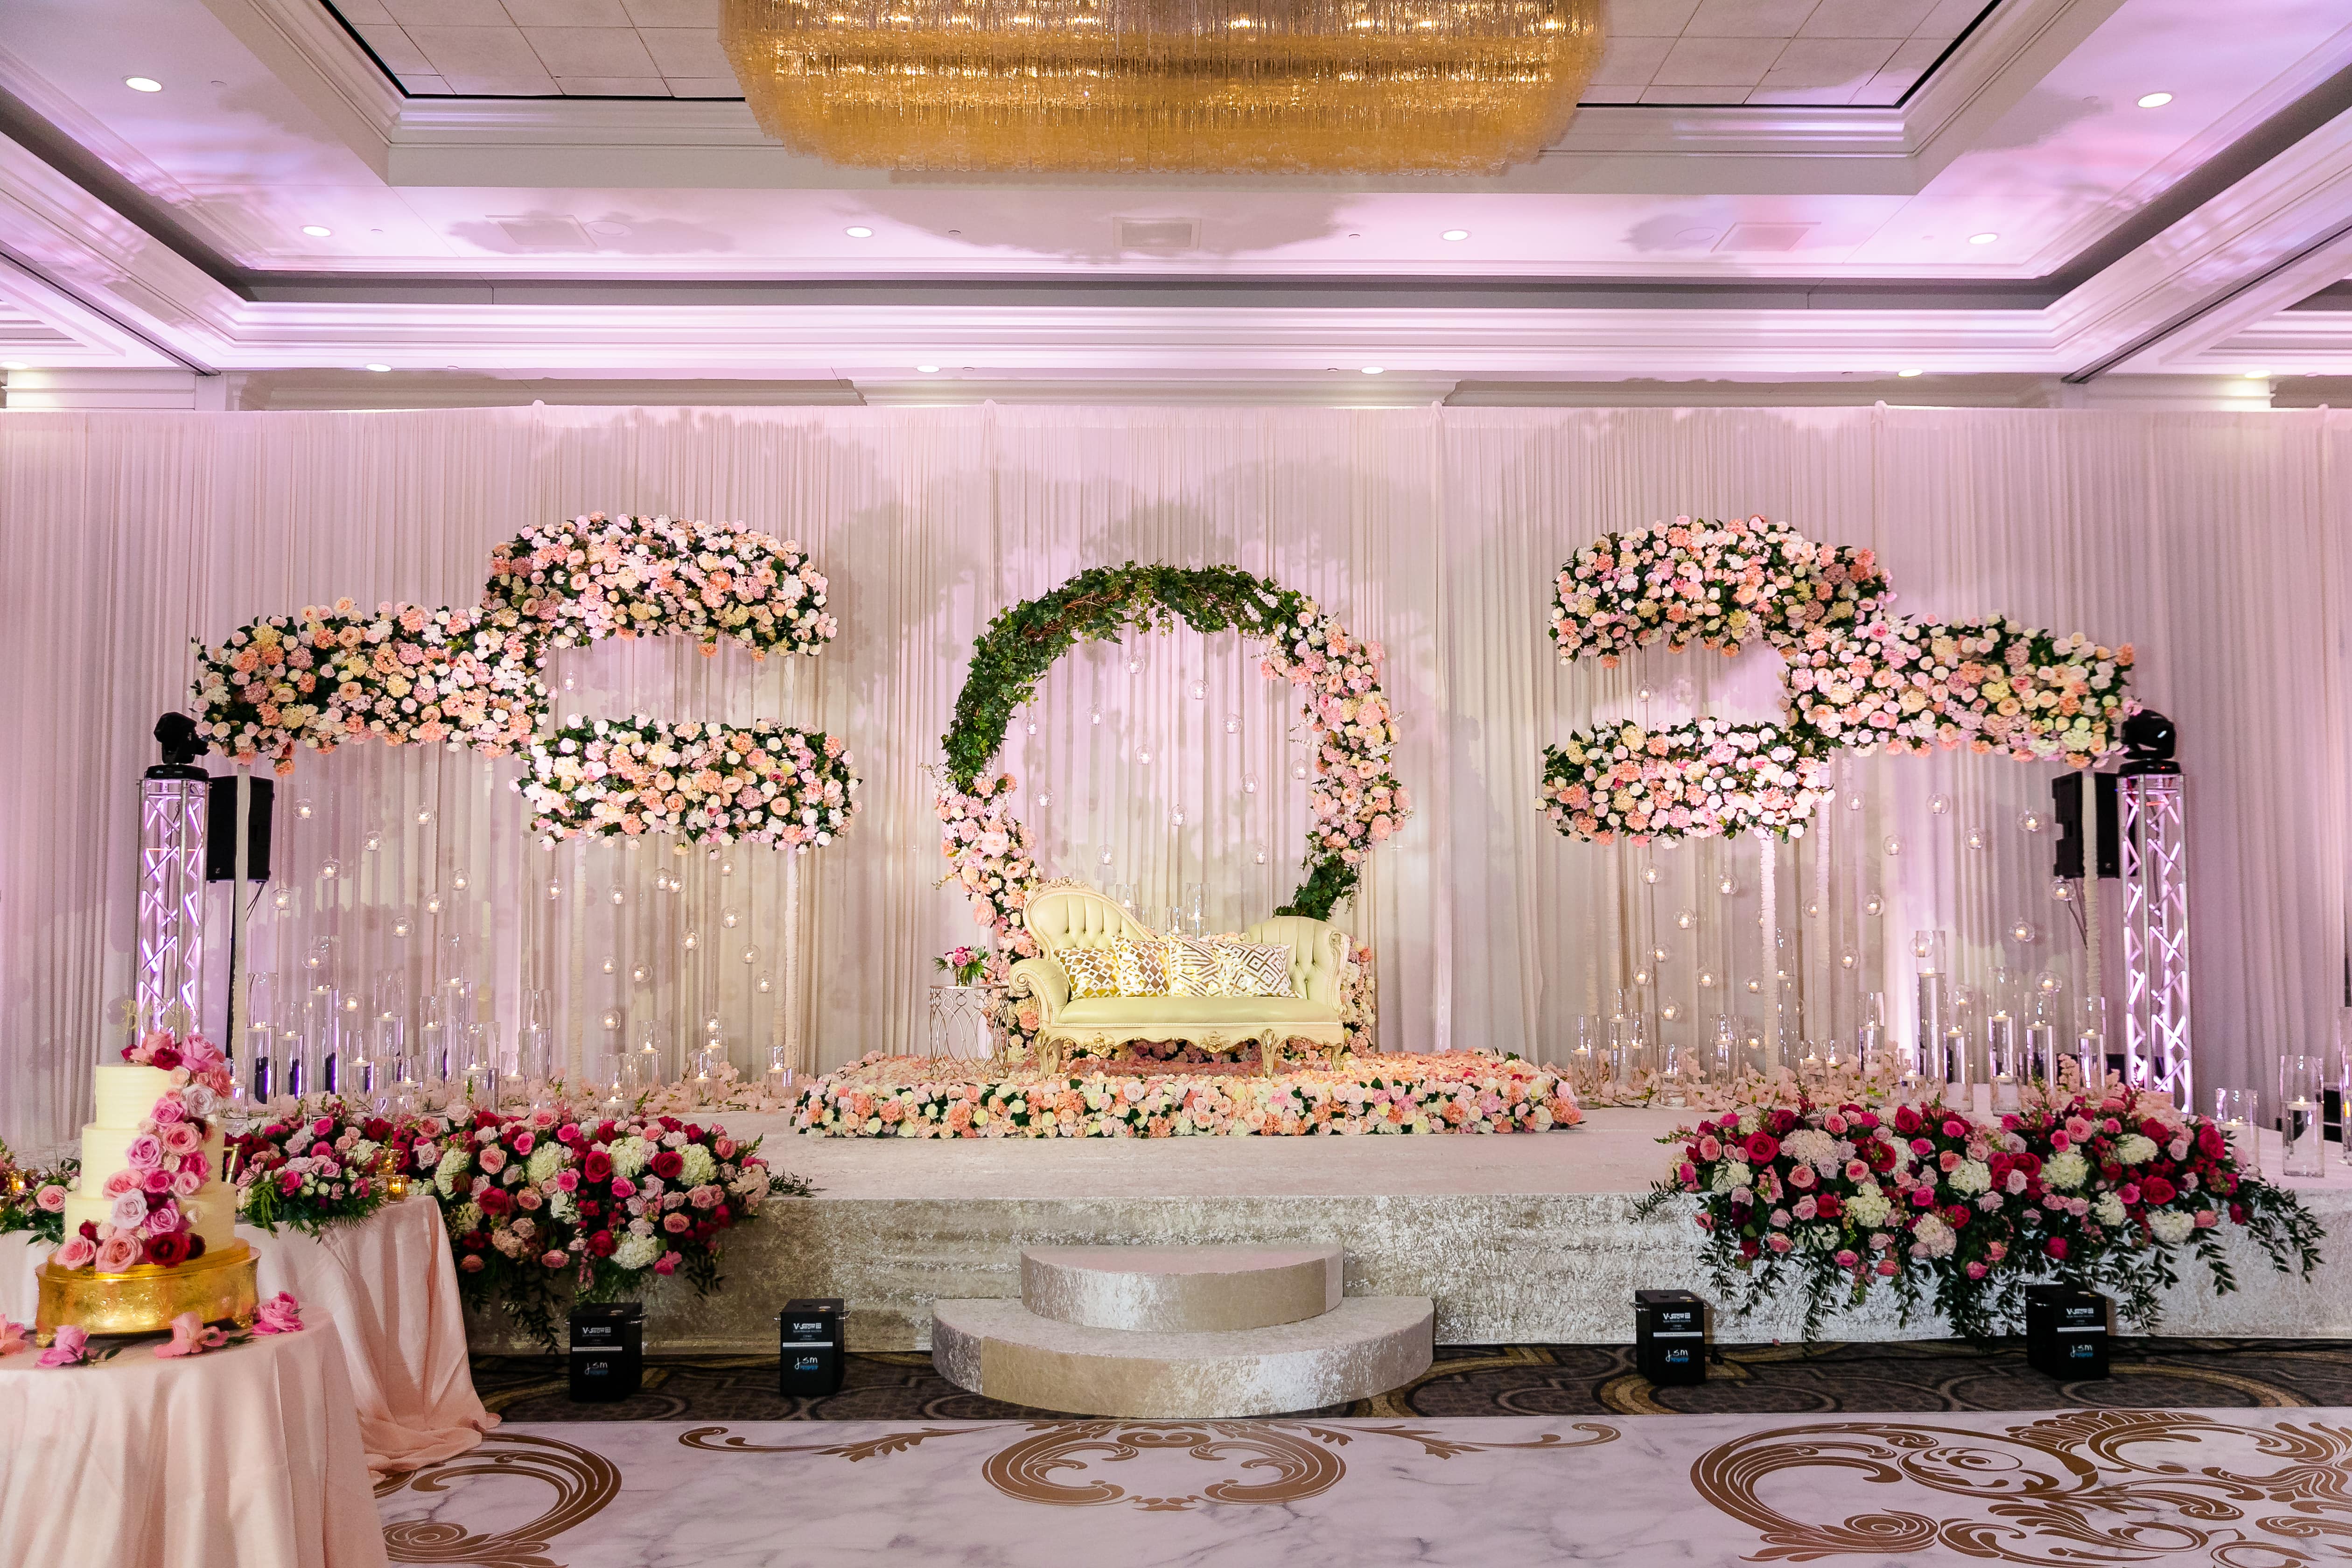 Best Weddings In Columbus Ohio Yanni, How To Decorate Wedding Venue With Flowers